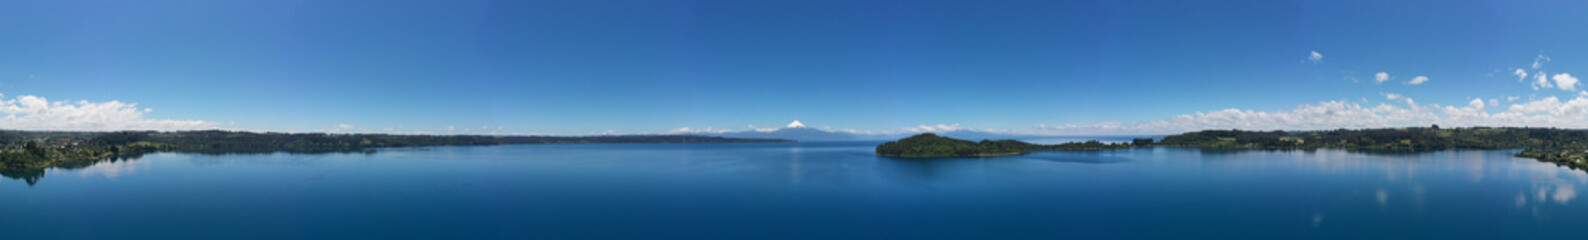 Aerial PANORAMIC landscape of Osorno Volcano and Llanquihue Lake - Puerto Varas, Chile, South America.